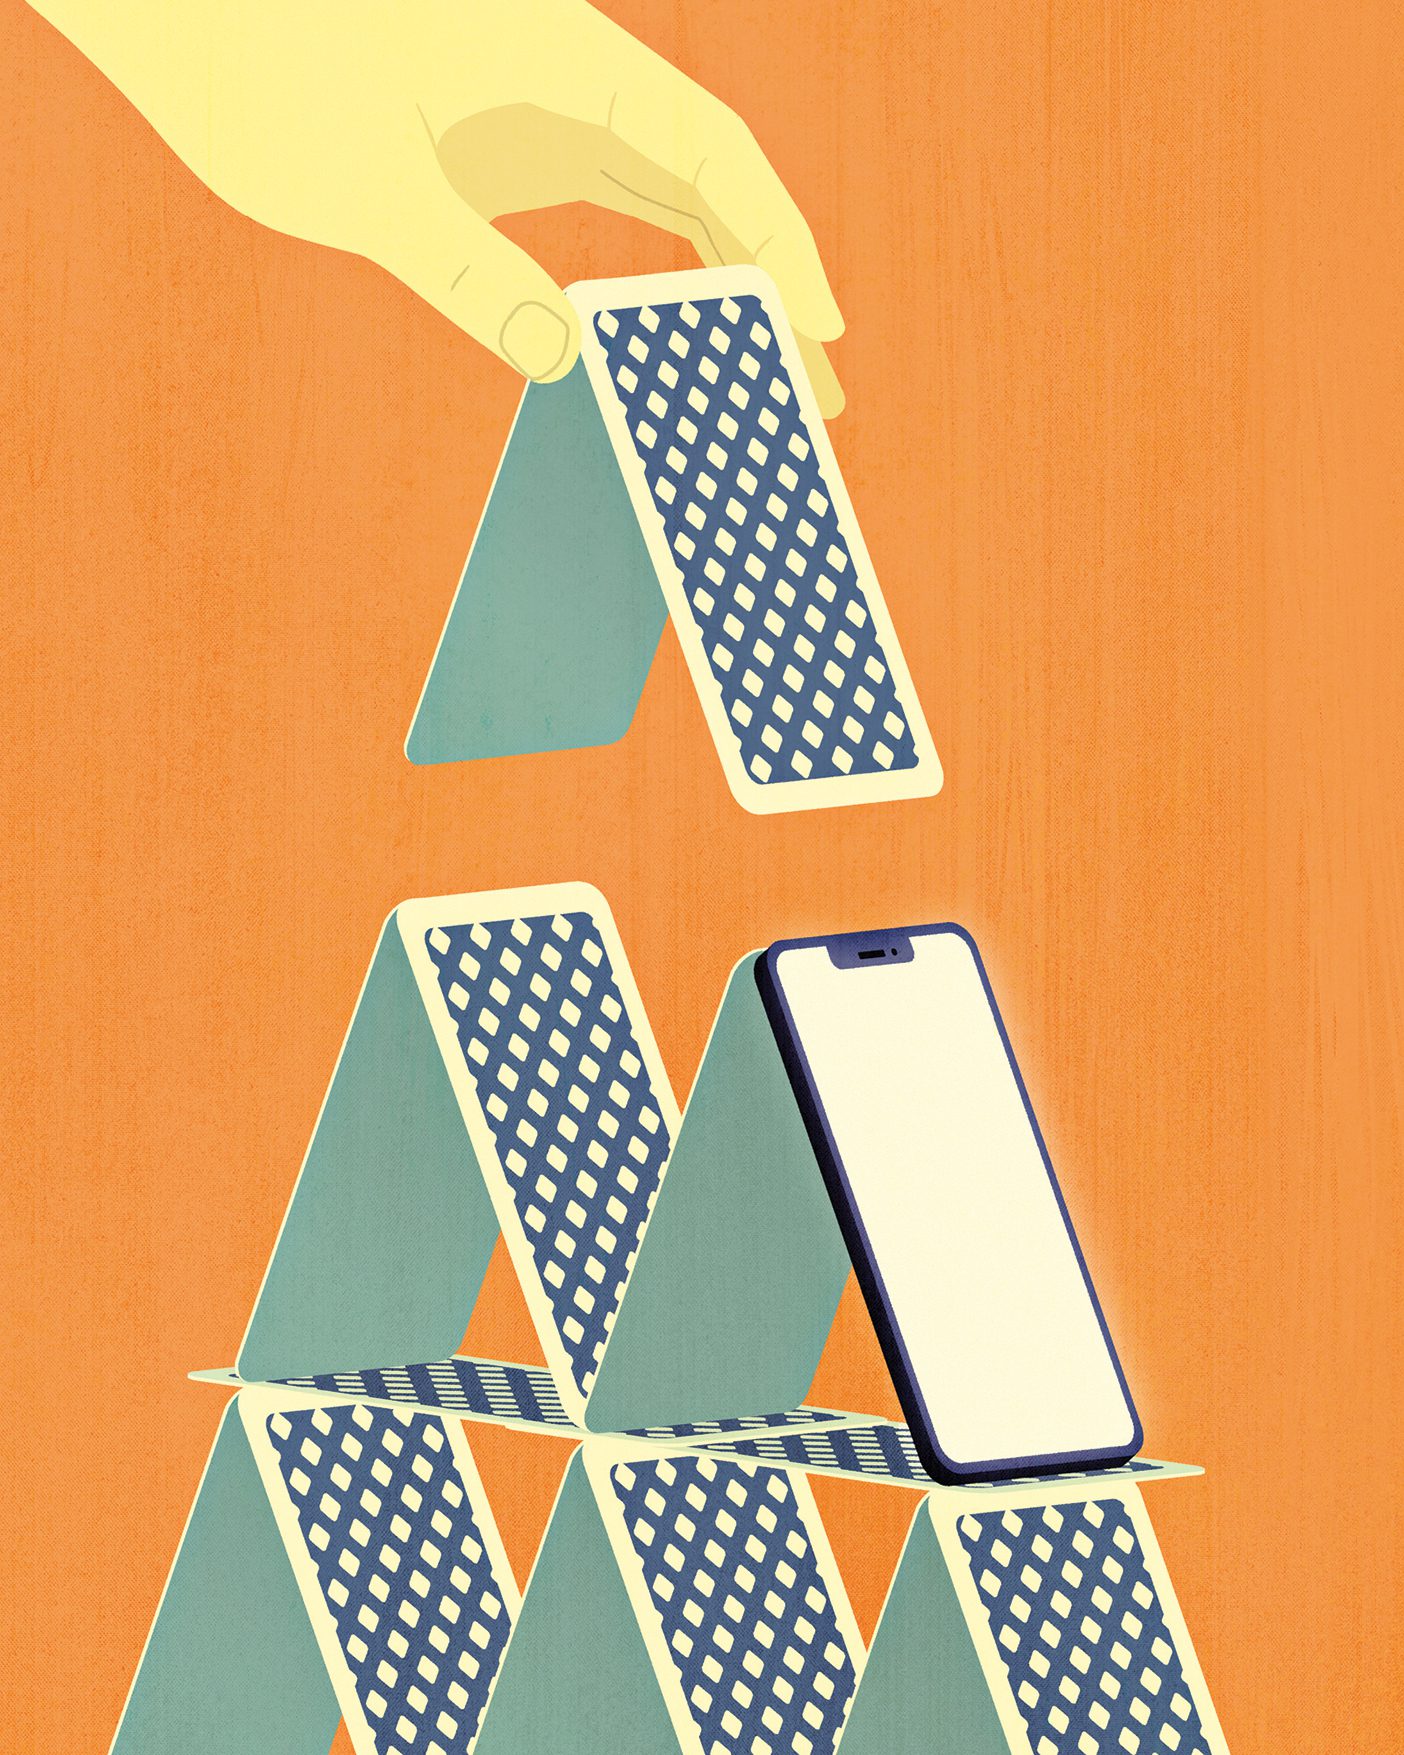 An illustration of someone a pyramid with a deck of cards. One of the cards looks like a smartphone.